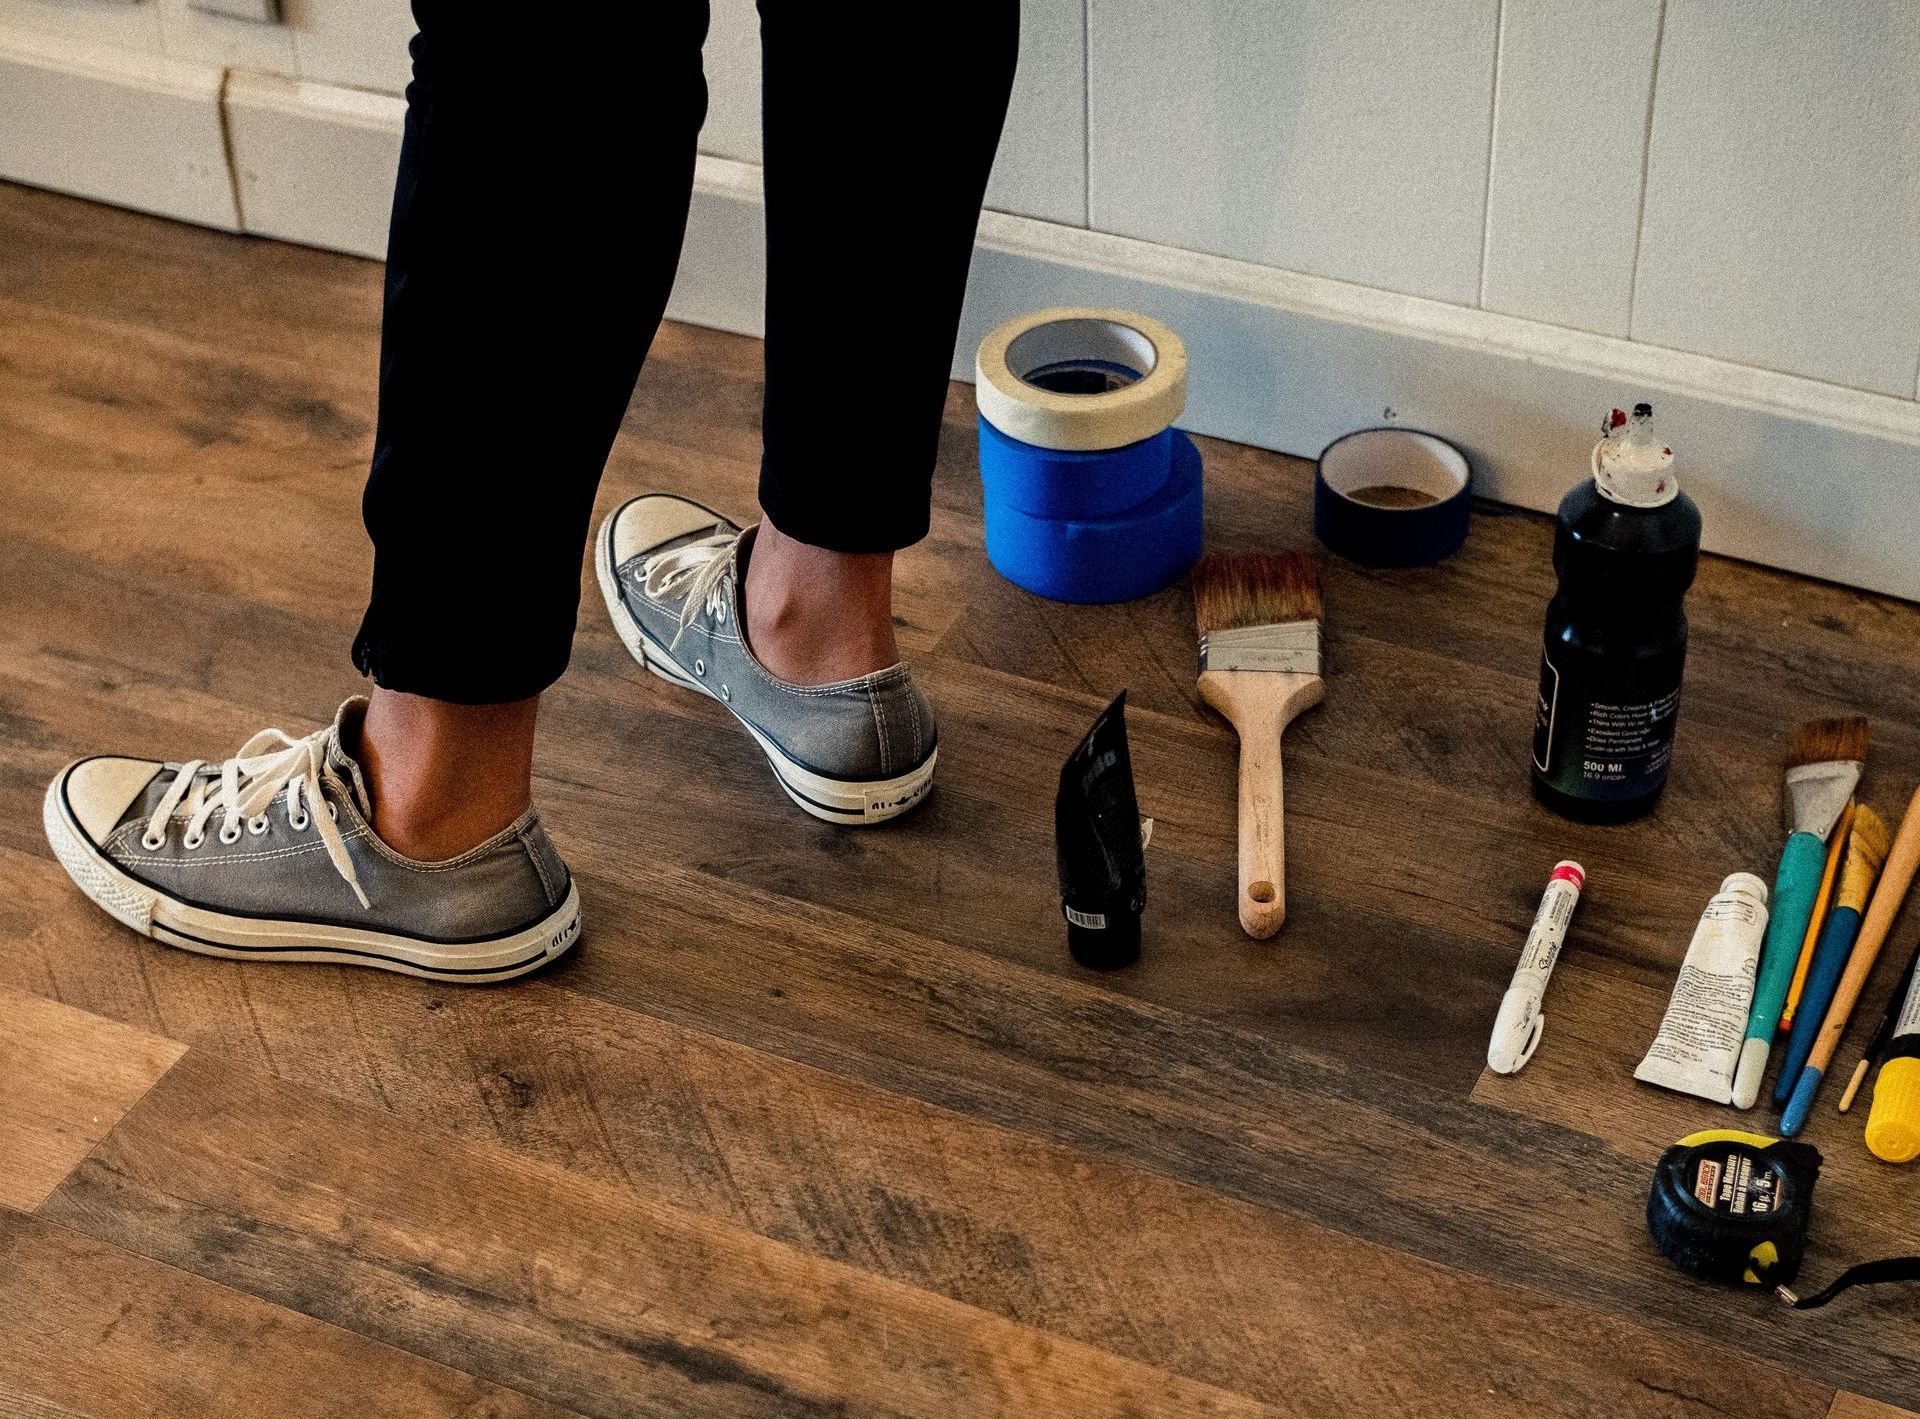 a person wearing converse shoes is standing on a wooden floor surrounded by tools